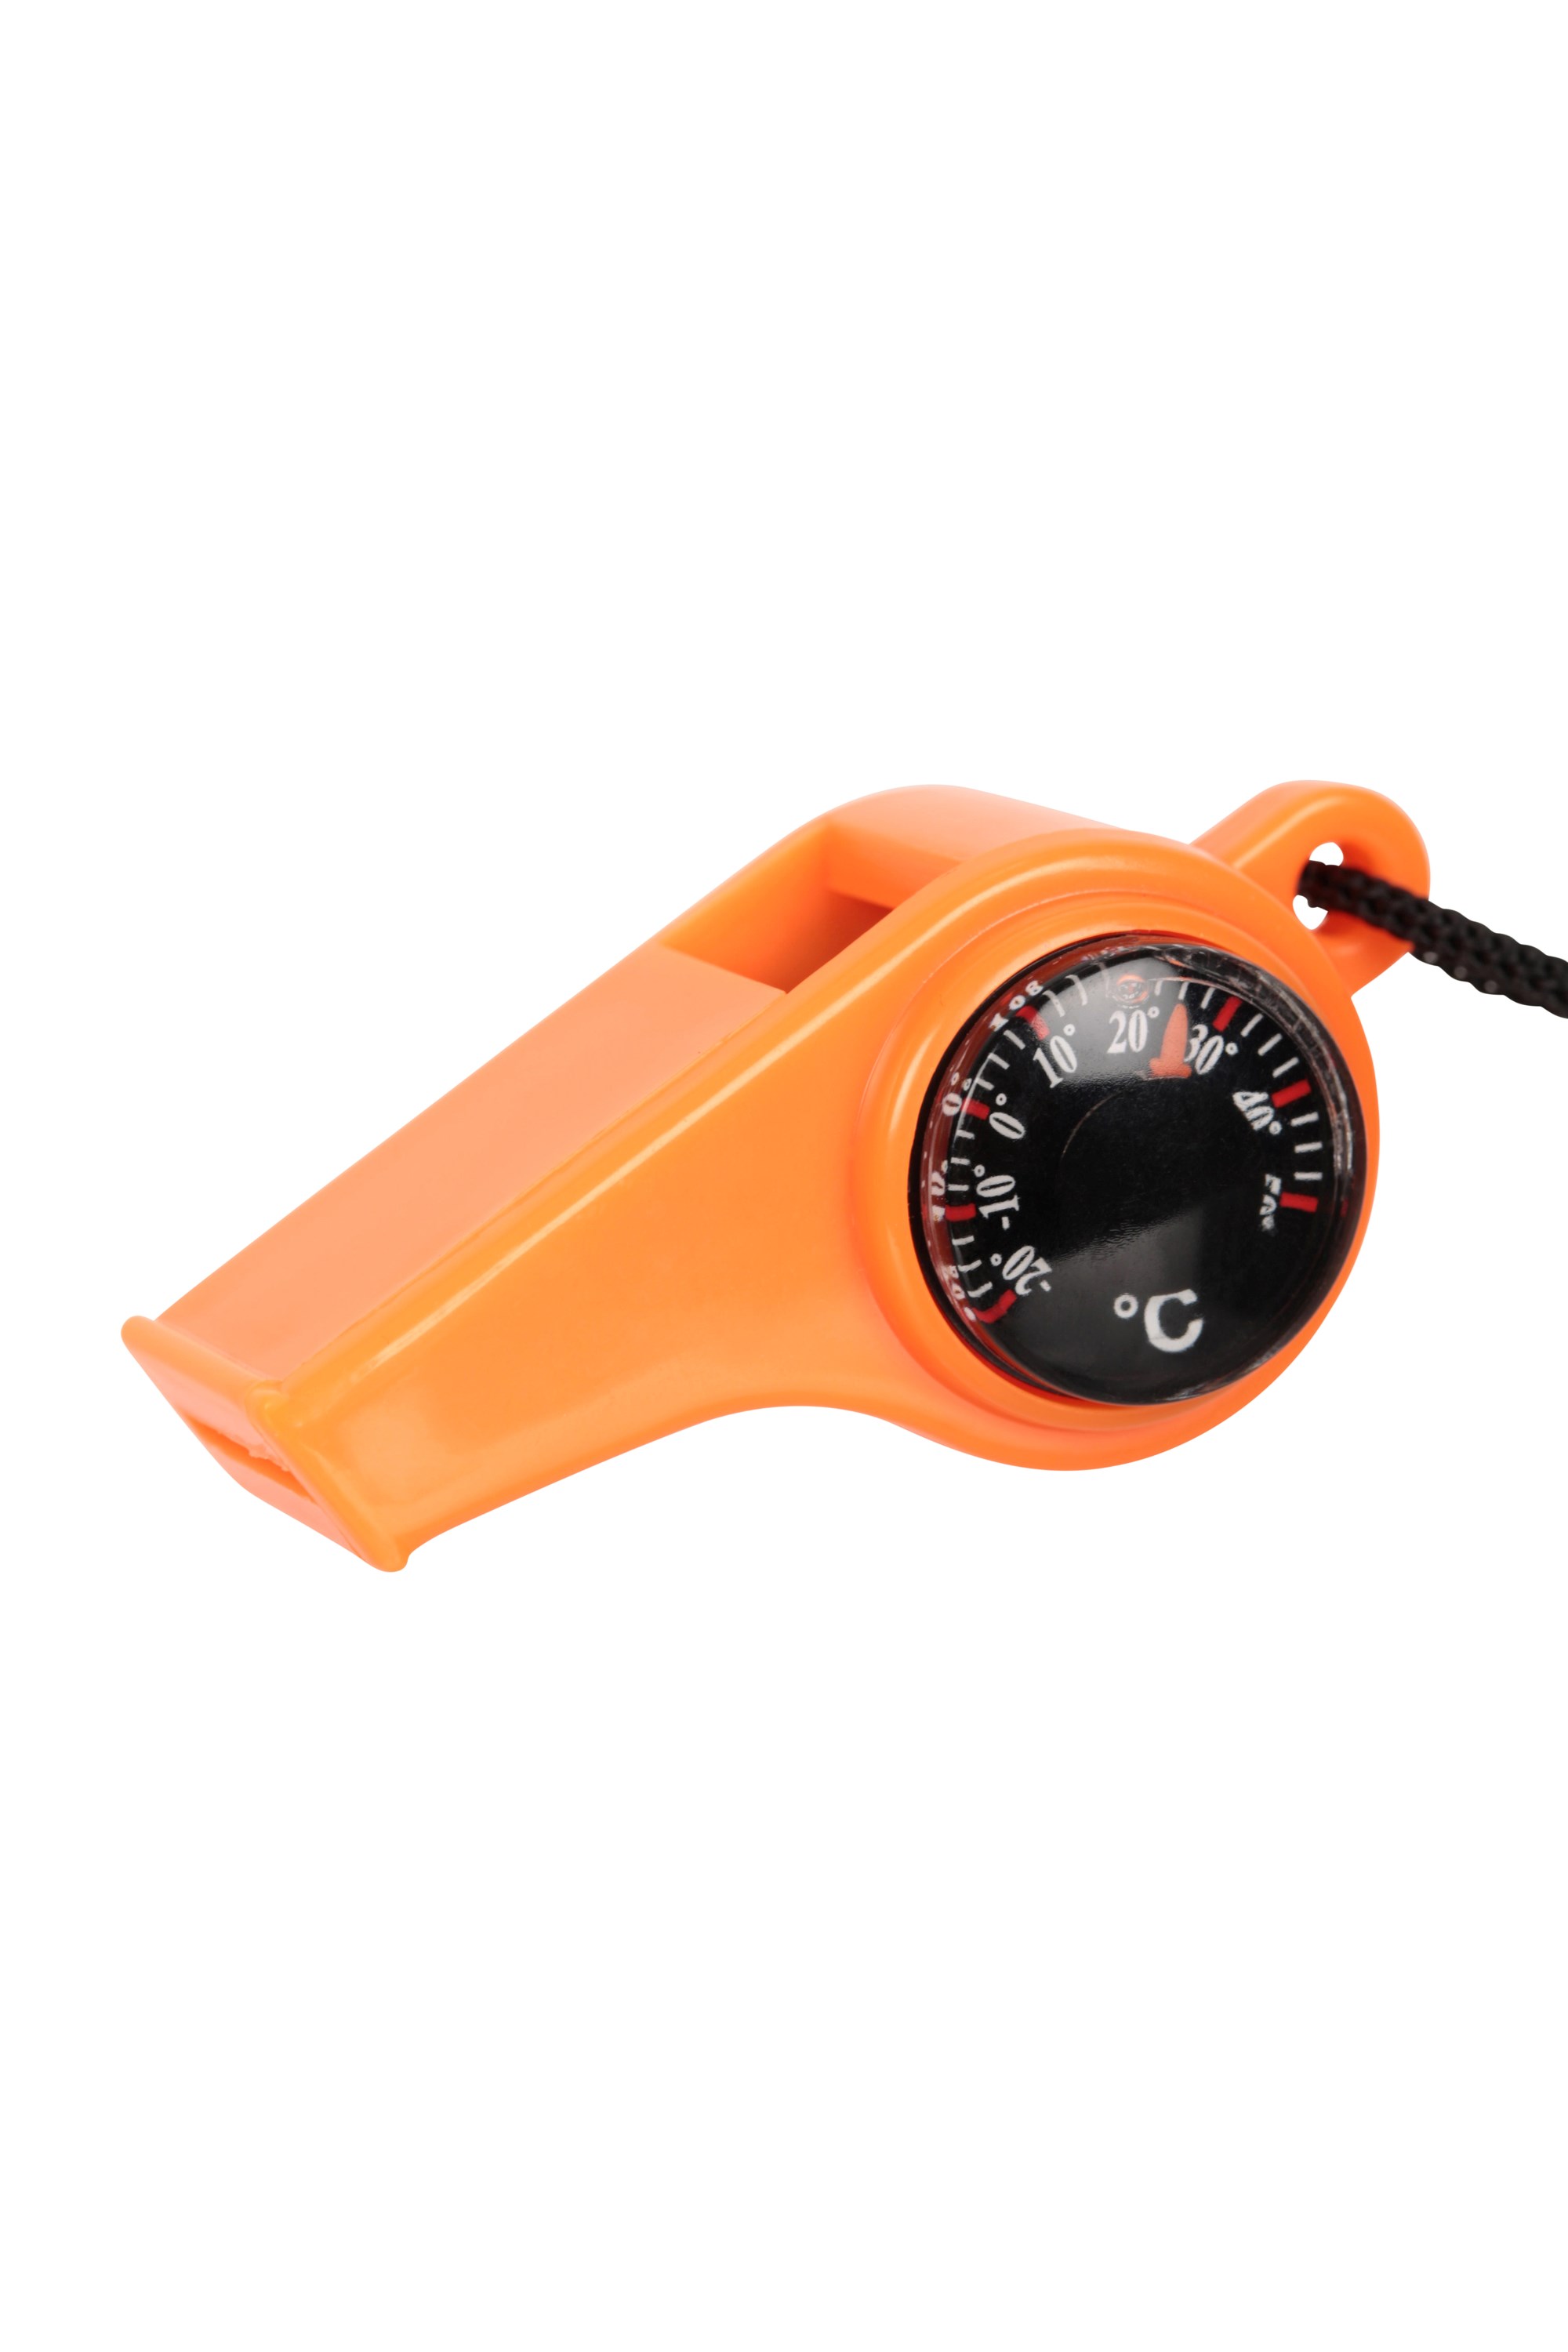 https://img.cdn.mountainwarehouse.com/product/022435/022435_ora_3_in_1_emergency_whistle_with_compass_har_aw23_02.jpg